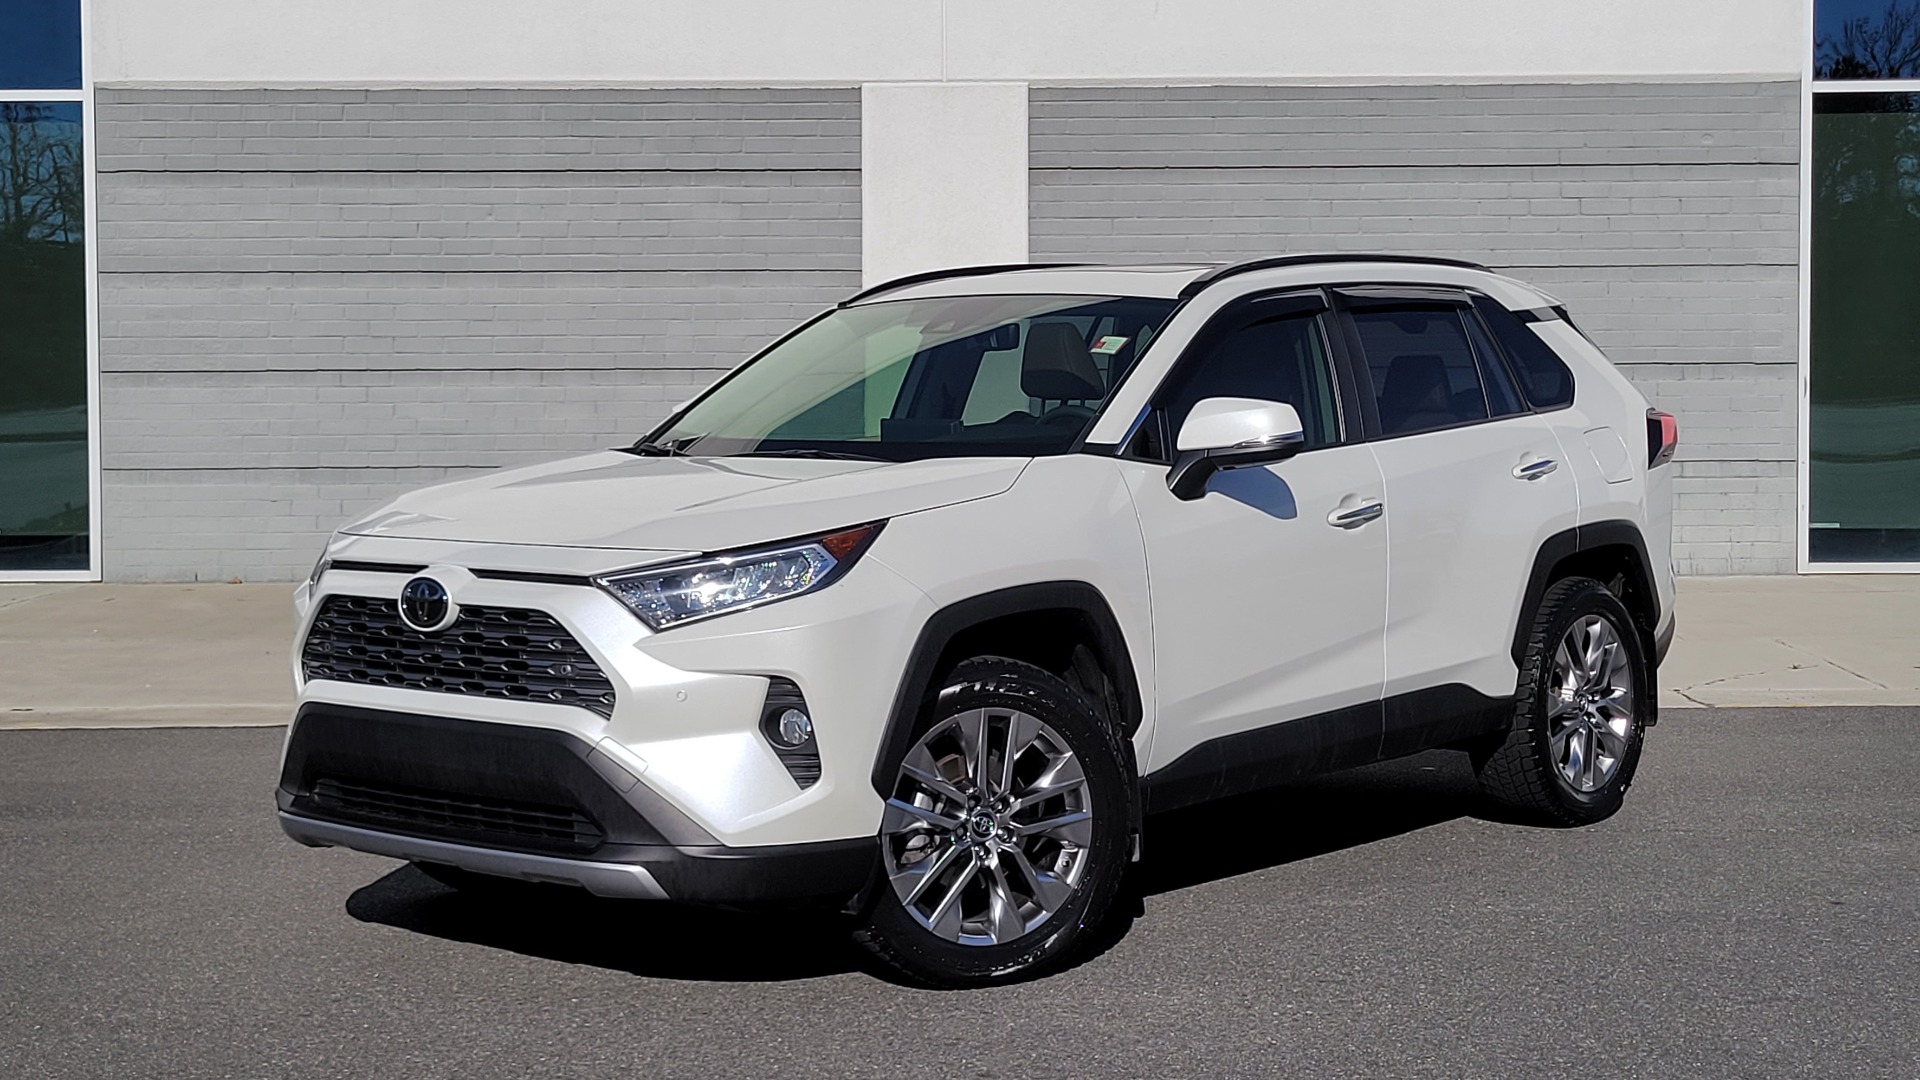 Used 2019 Toyota RAV4 LIMITED / AWD / 2.5L I4 / 8-SPD AUTO / 19IN WHEELS / REARVIEW for sale $35,995 at Formula Imports in Charlotte NC 28227 1